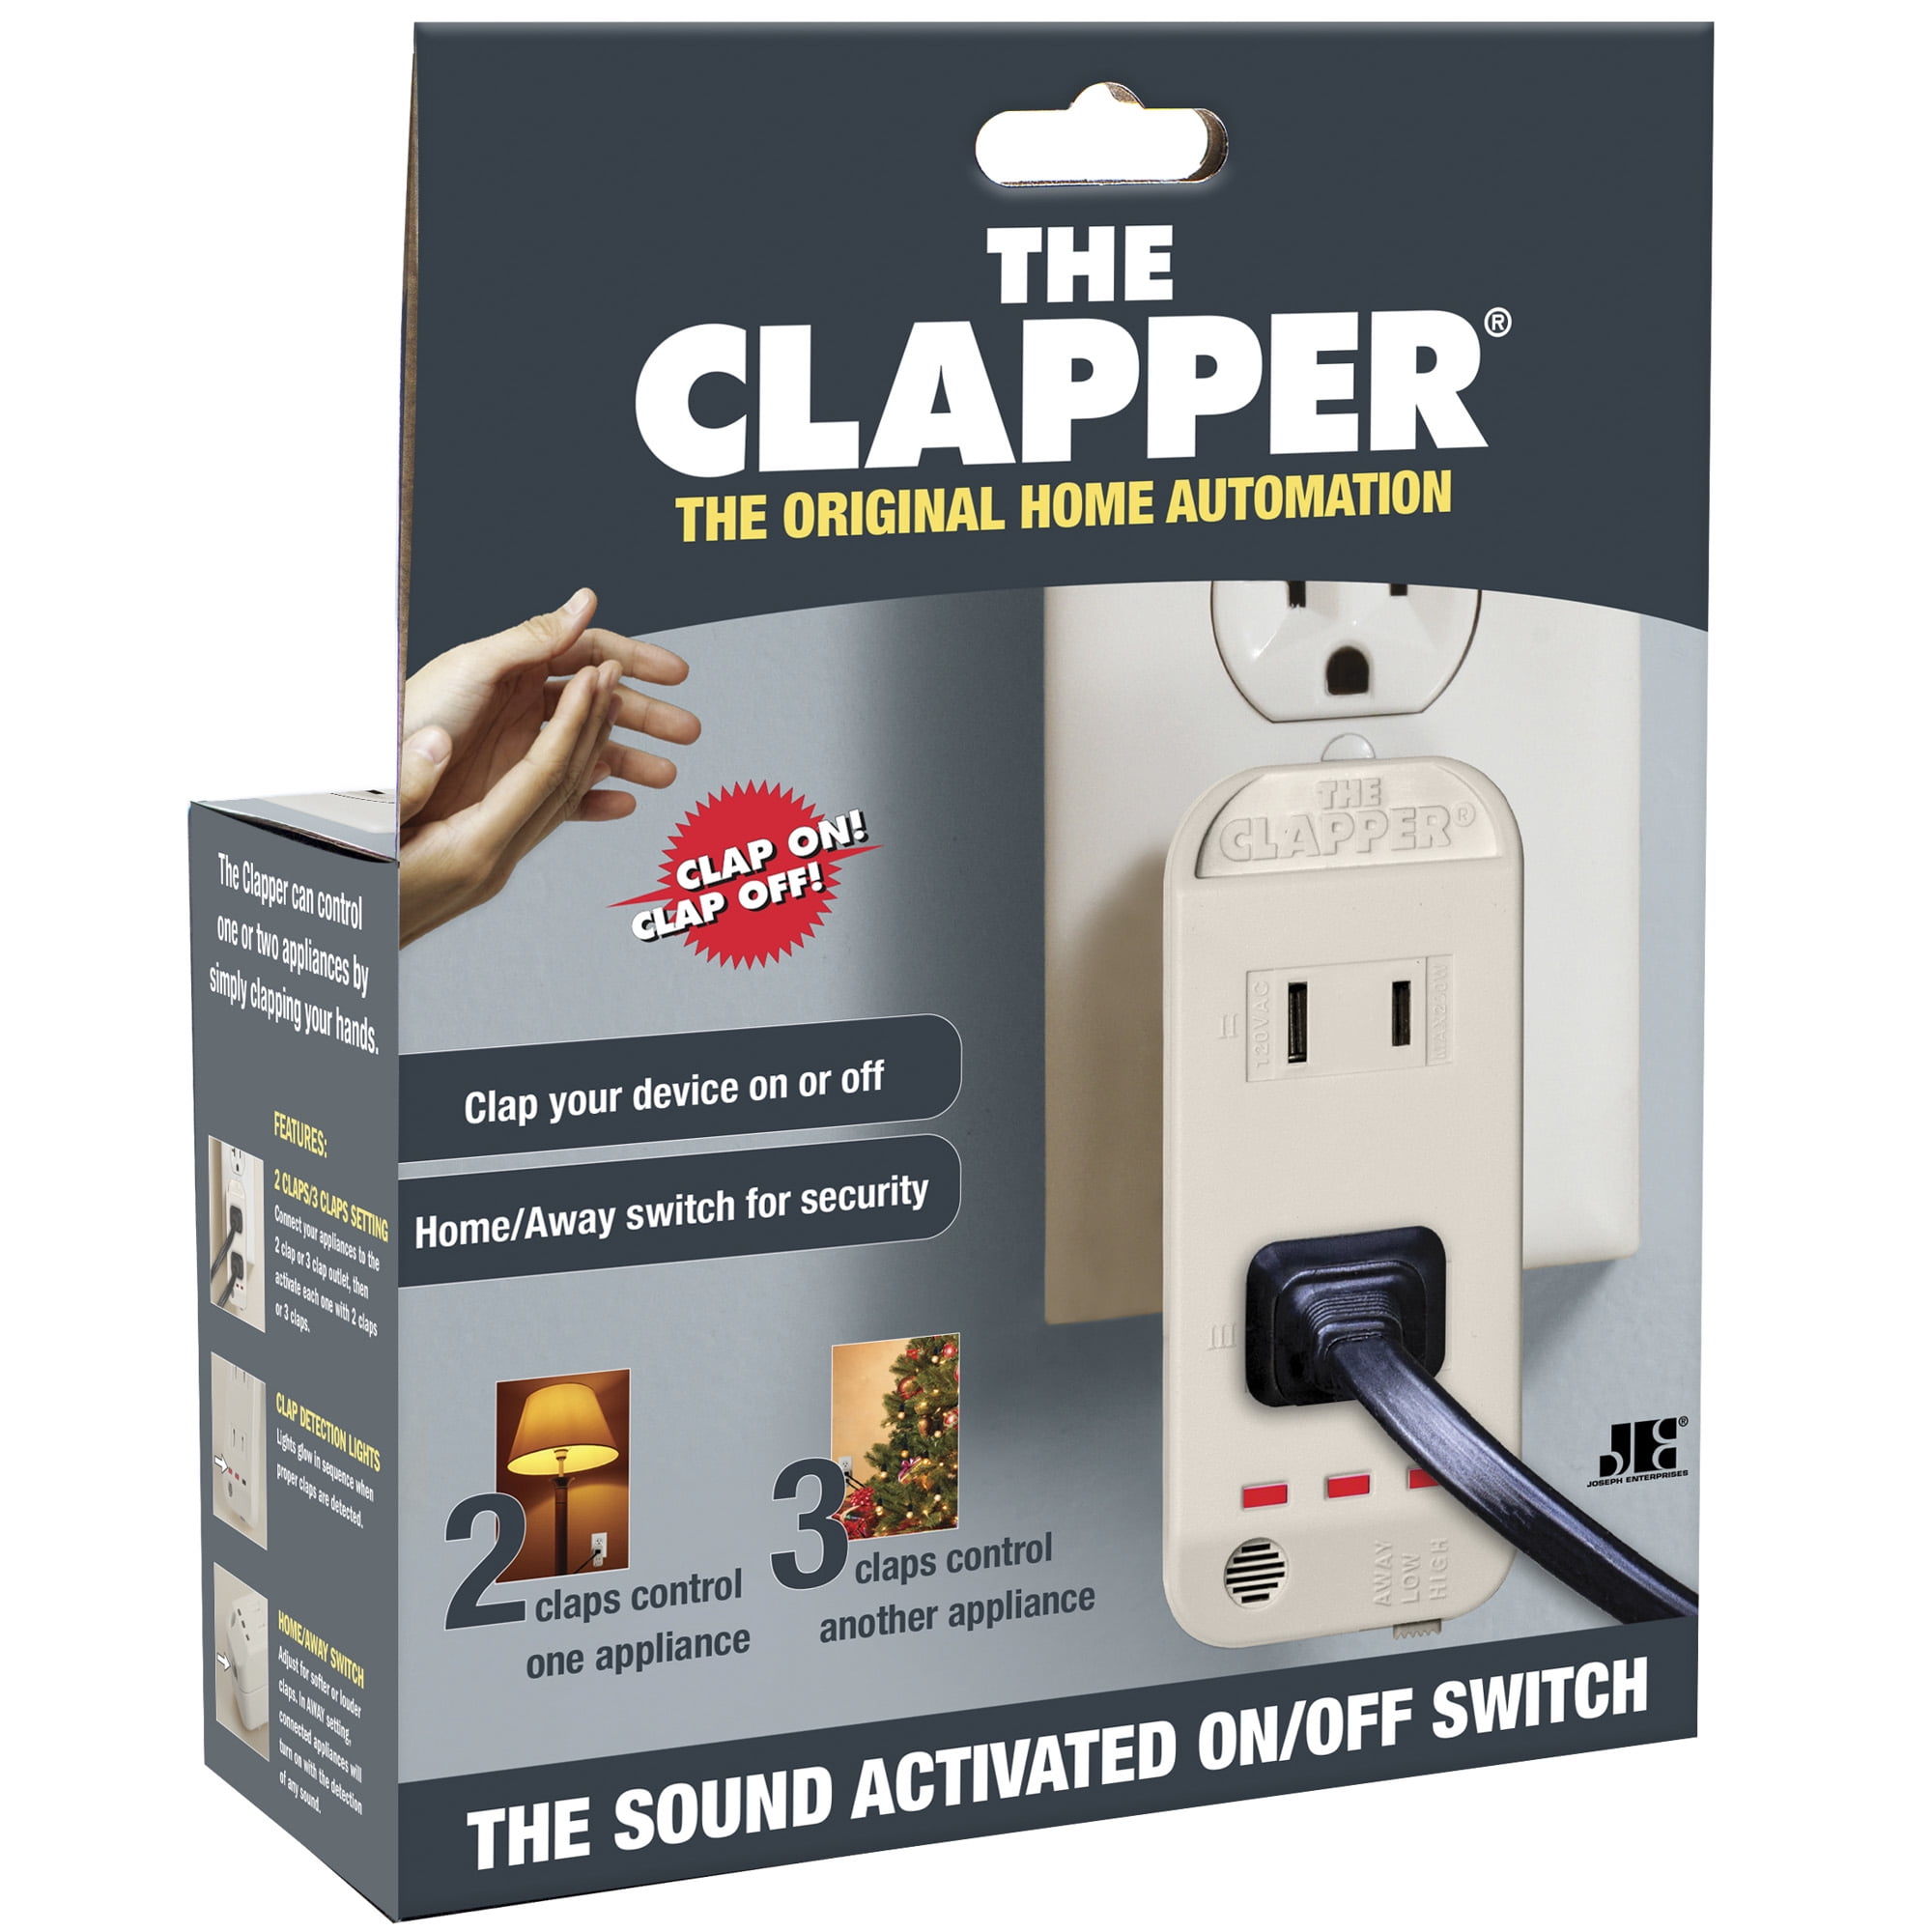 The Clapper, The Original Home Automation Sound Activated Device, On/Off  Light Switch, Clap Detection - Kitchen Bedroom TV Appliances - 120v Wall  Plug Smart Home Technology, As Seen On TV Home Gift